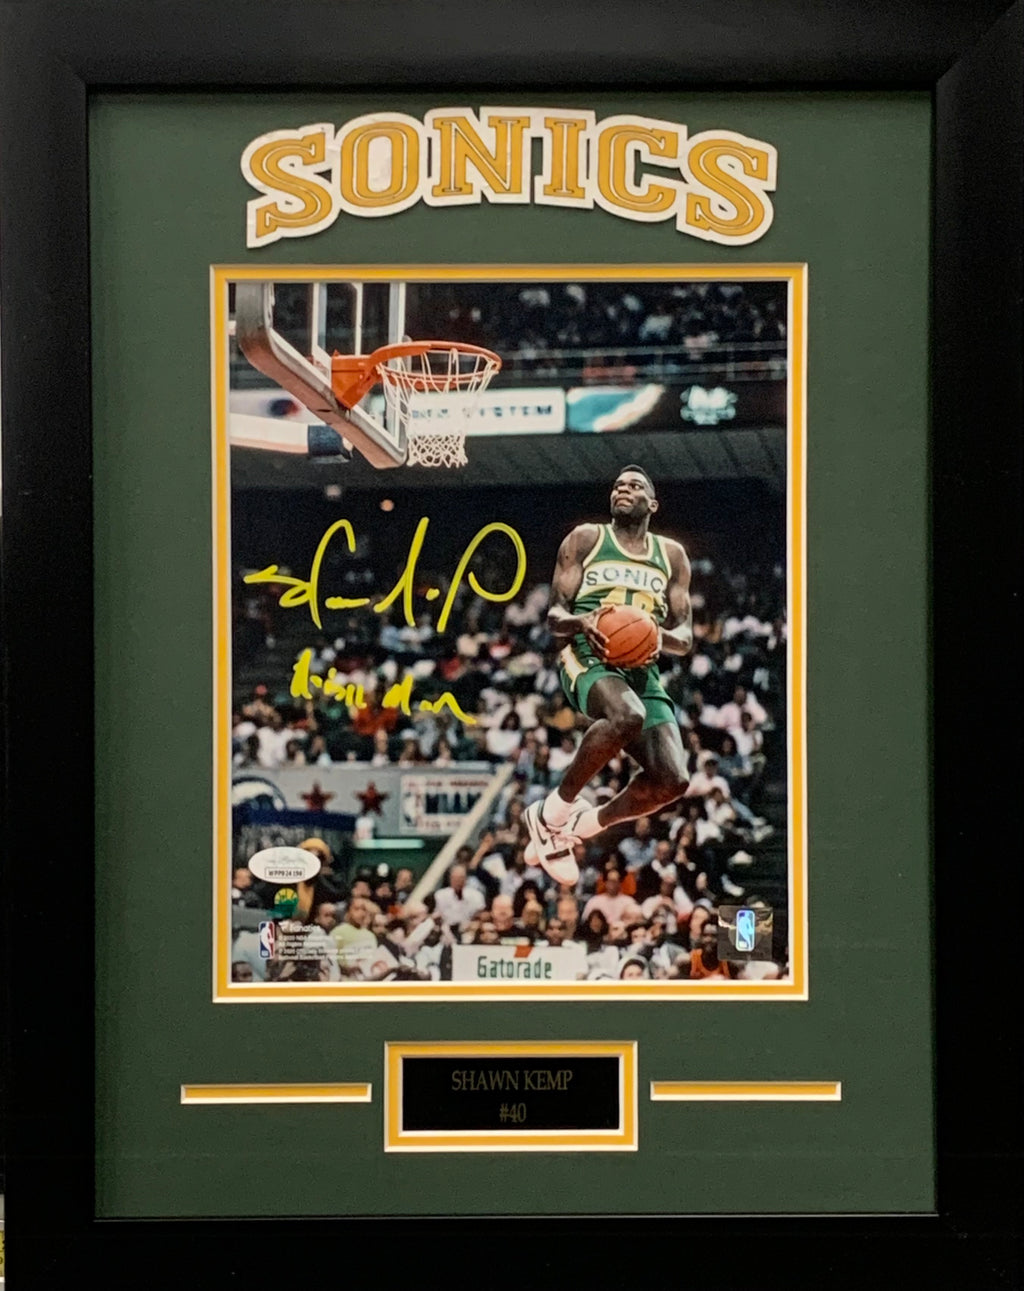 Shawn Kemp autographed signed inscribed 8x10 framed NBA Seattle SuperSonics JSA